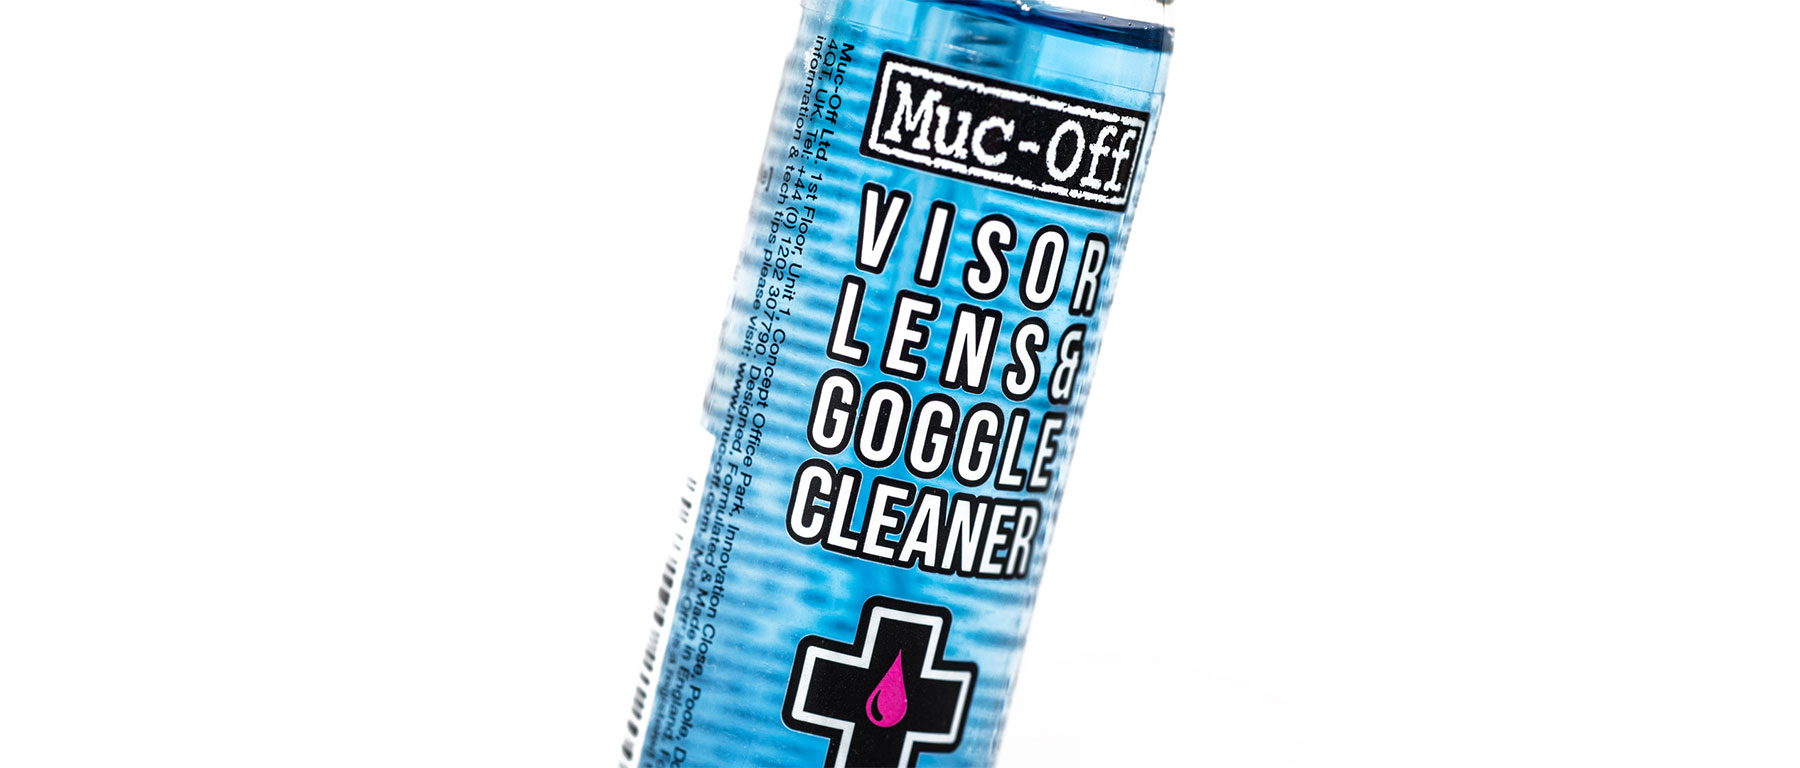 Muc-Off Visor, Lens, and Goggle Cleaning Kit